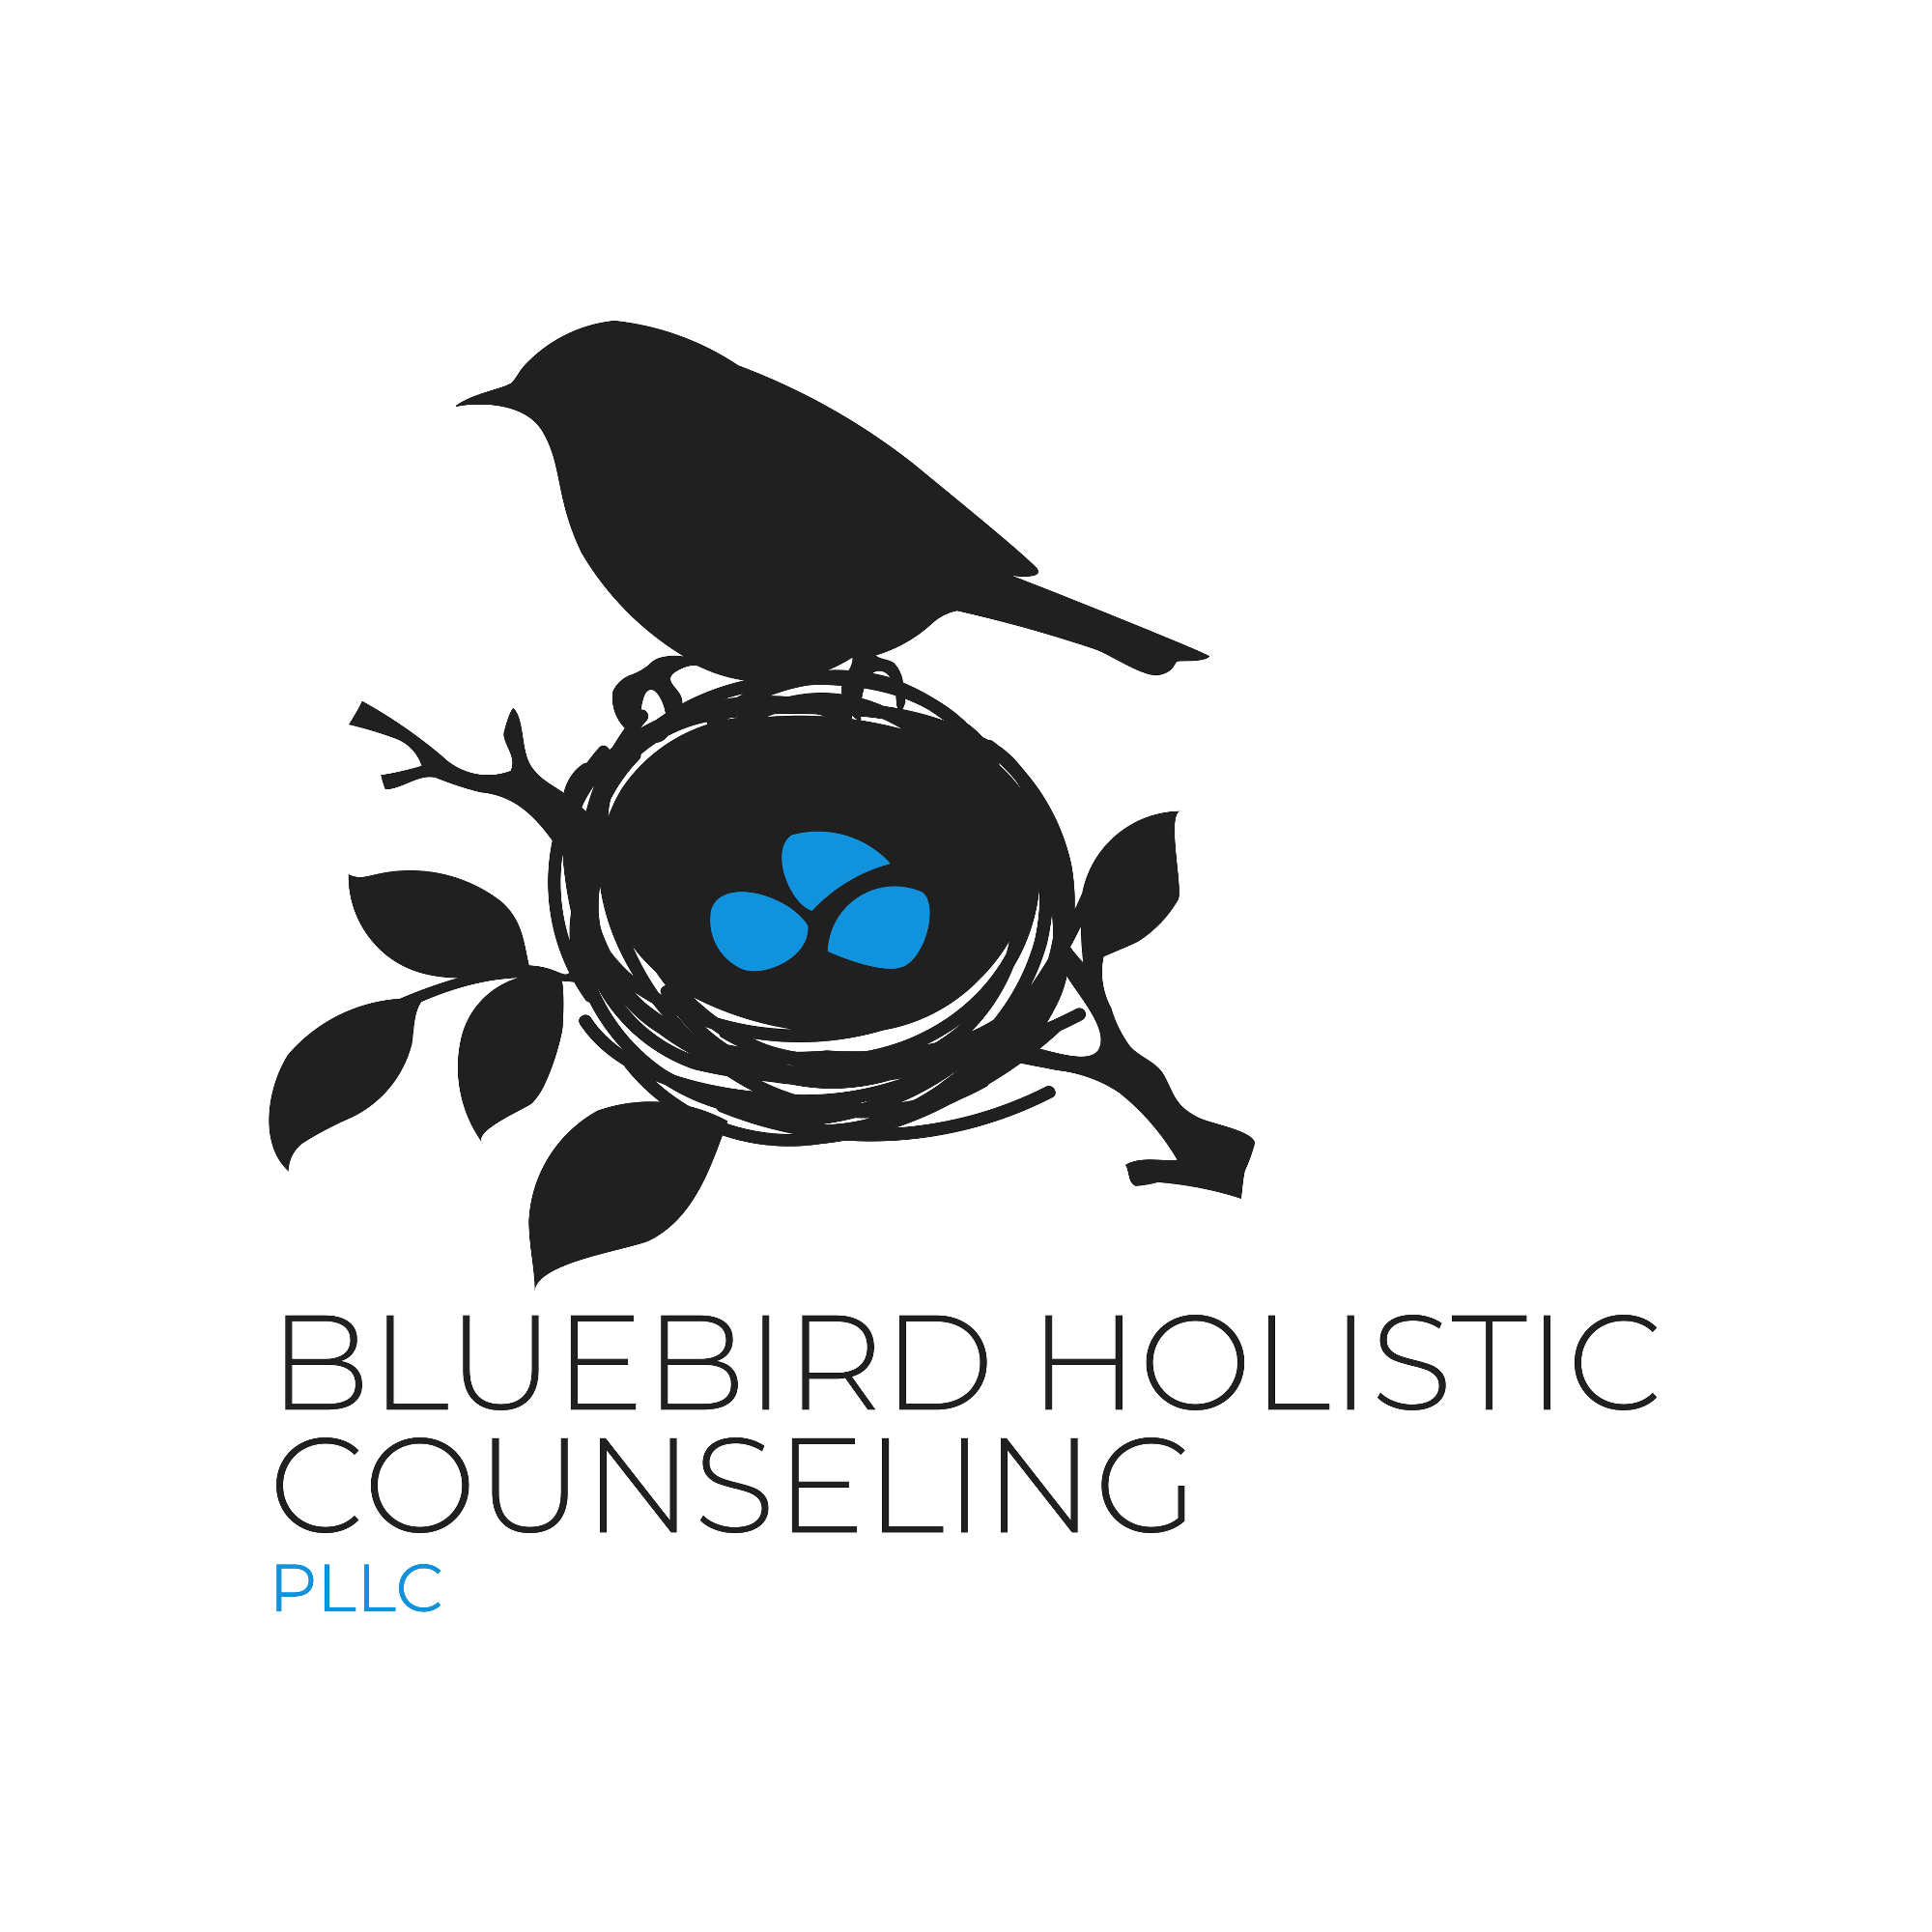 This logo features the words Bluebird Holistic Counseling in black capital letters. Under that is PLLC in smaller, blue capital letters. Above the text is a black silhouette of a bird sitting on the edge of a next with three blue eggs in it.